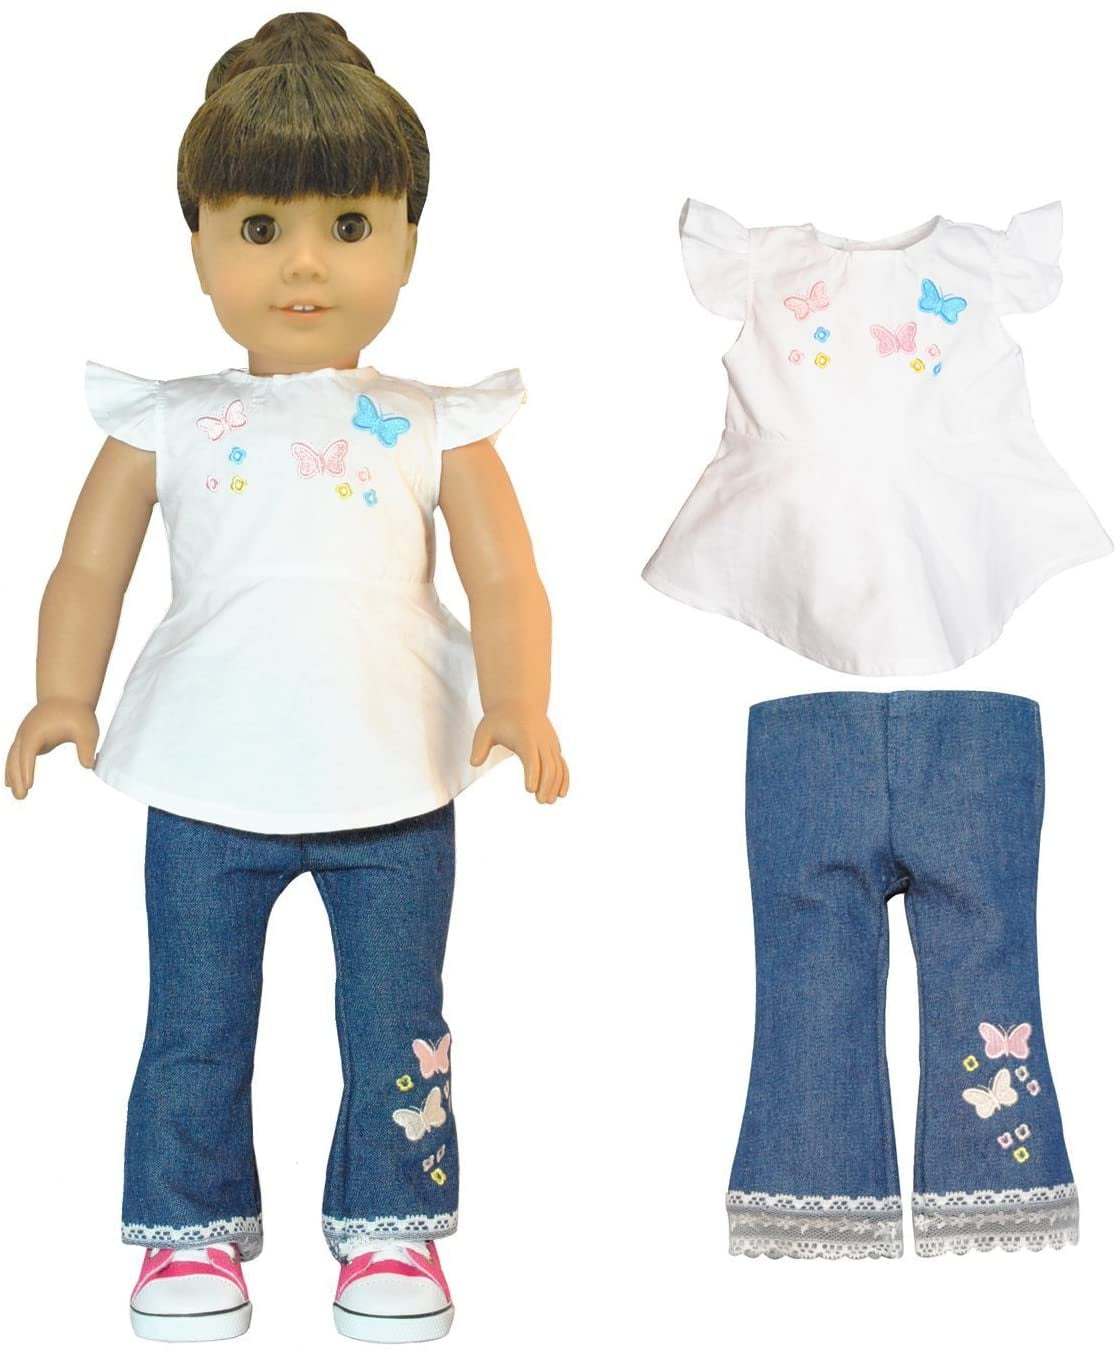 Denim Jumper w/Unicorn Embroidery & Pink Tee fits 18" American Girl Size Doll 